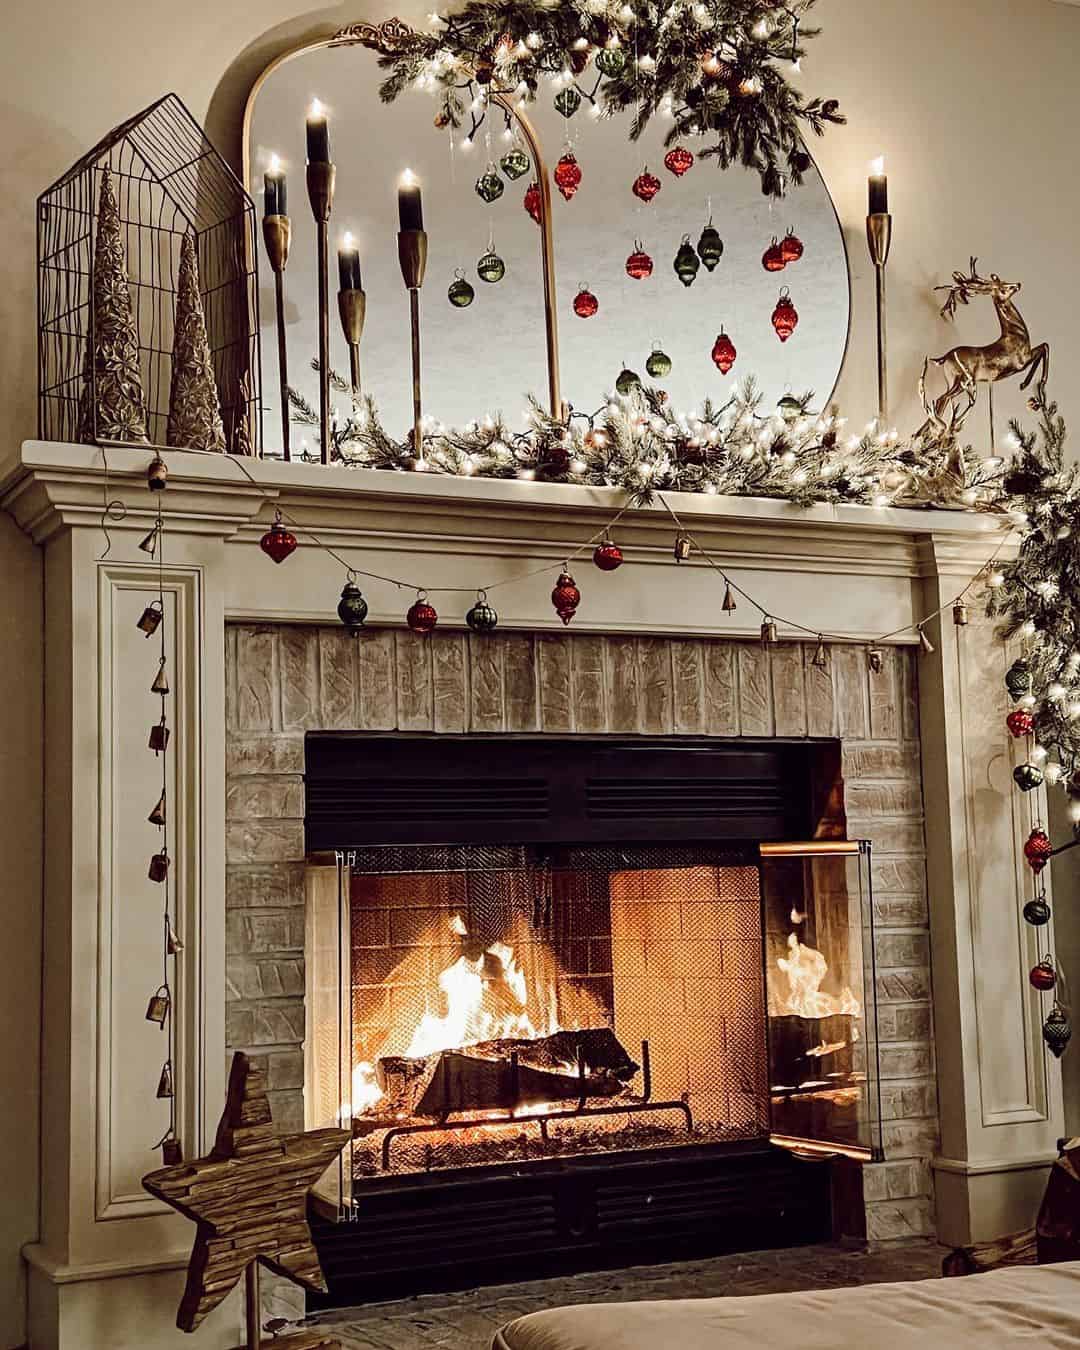 Classic Ornaments and a Crackling Fire - Soul & Lane